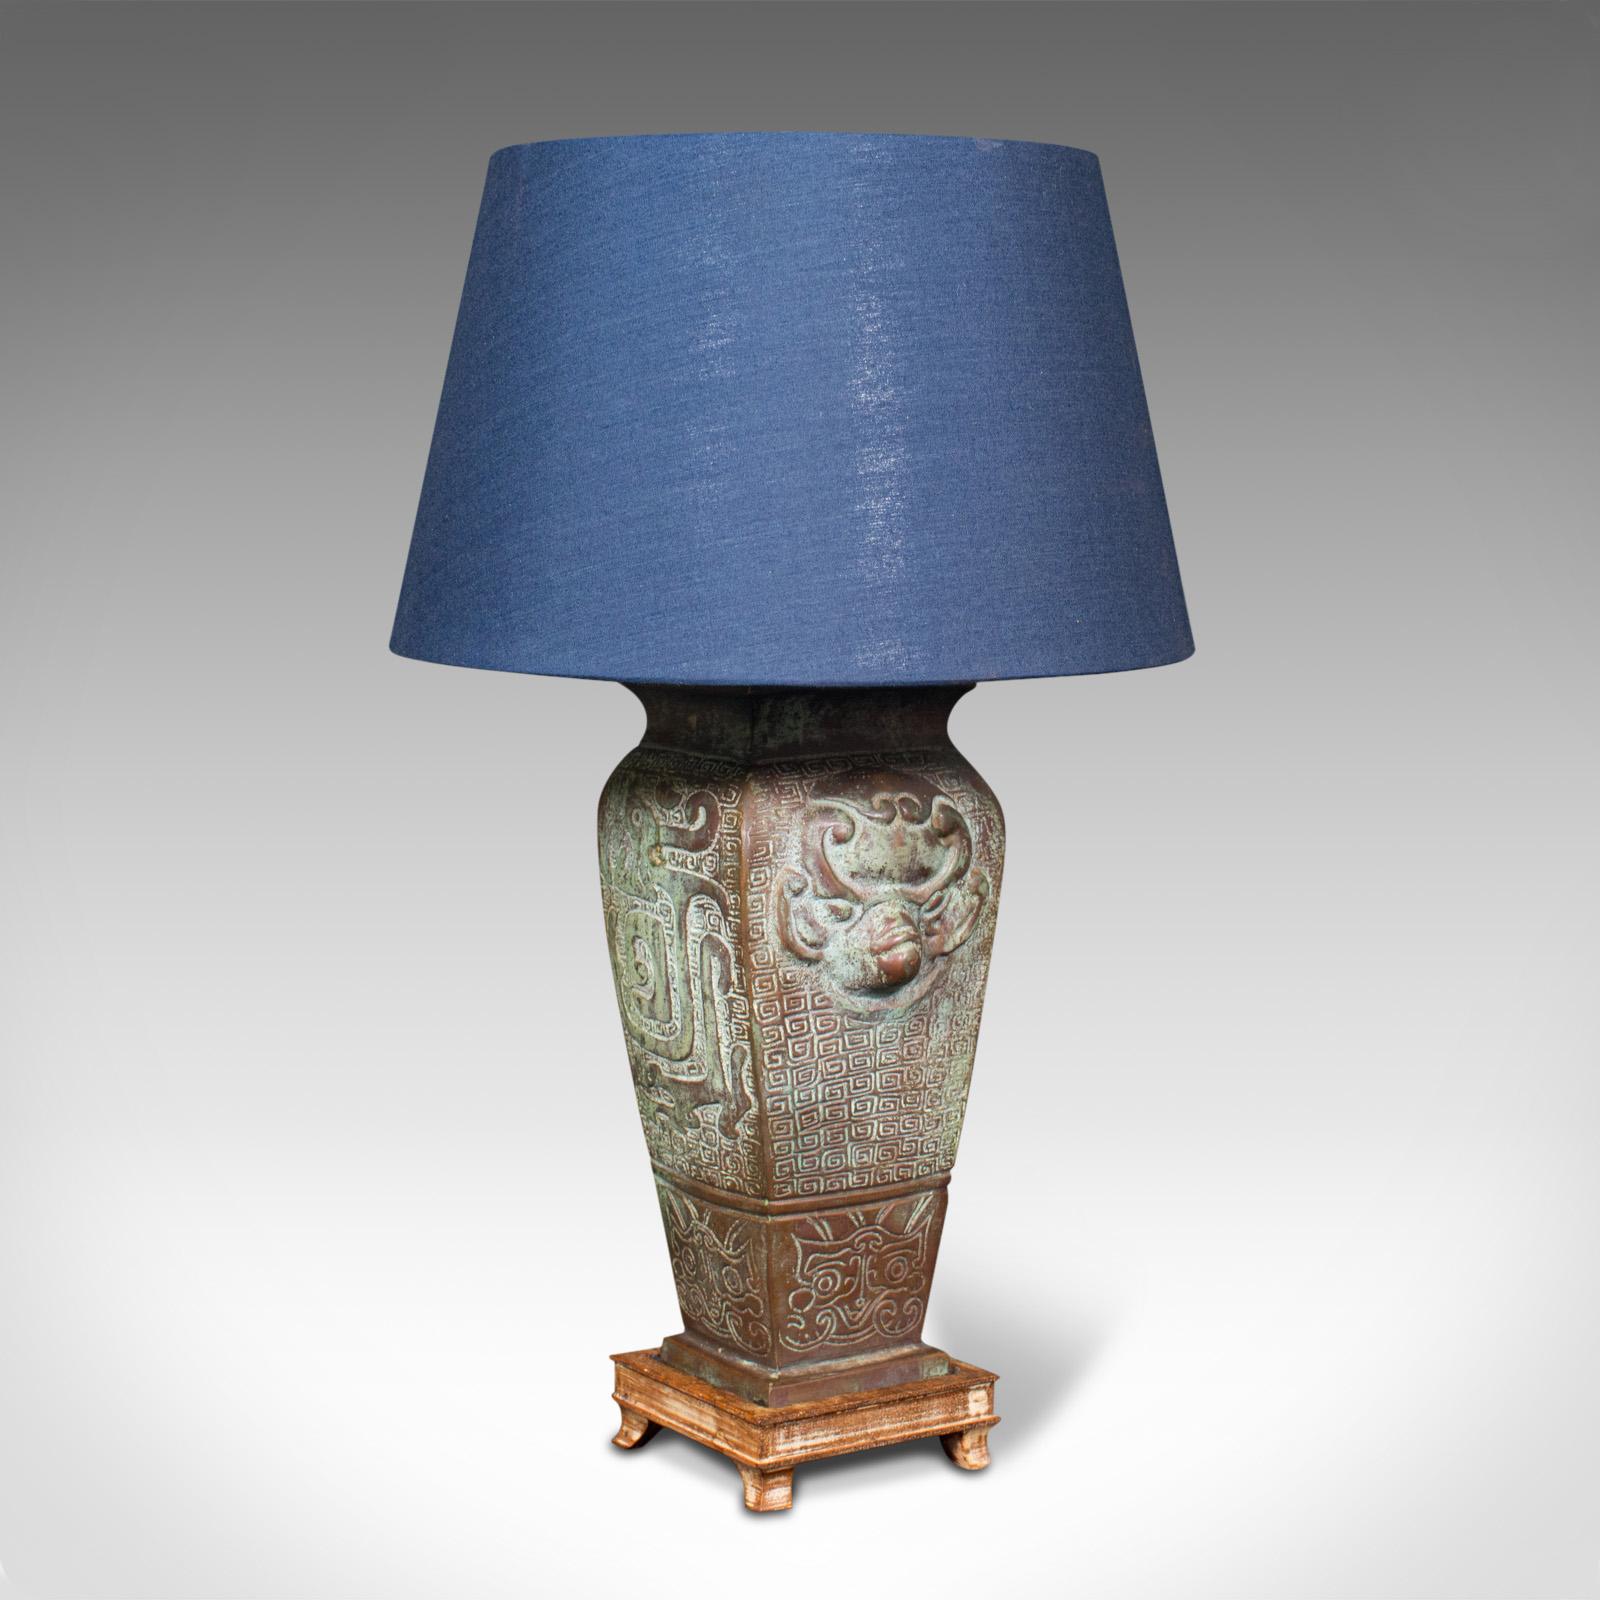 This is a vintage decorative table lamp. An oriental, bronze ornamental light, dating to the late 20th century, circa 1970.

Charming table lamp with pleasingly weathered appearance
Displays a desirable aged patina throughout
Bronze offers an